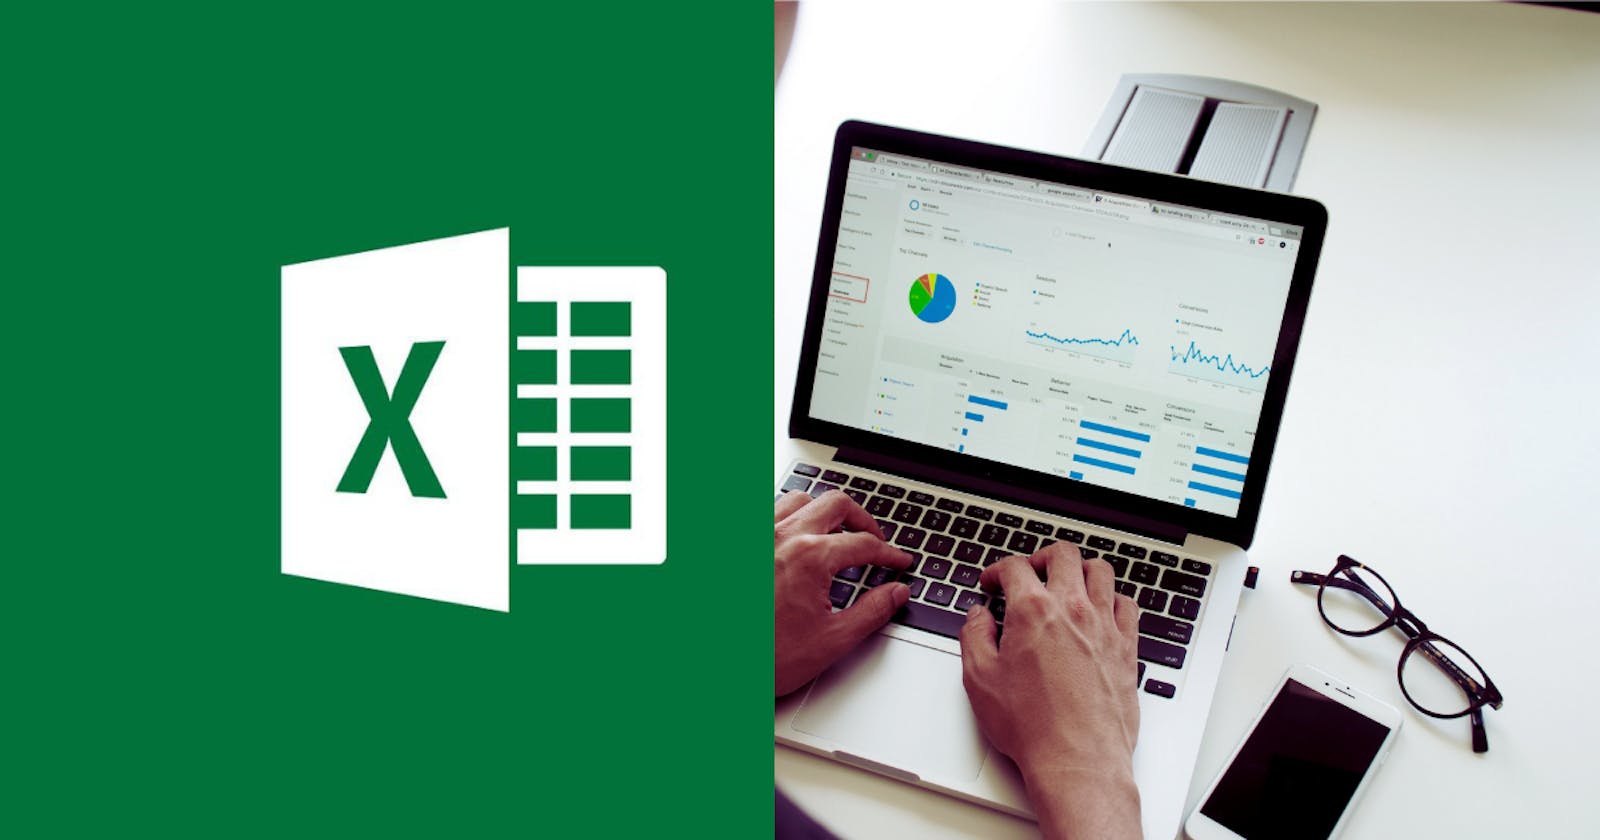 Excel Data Validation: How to Ensure Consistent and Accurate Data Entry.